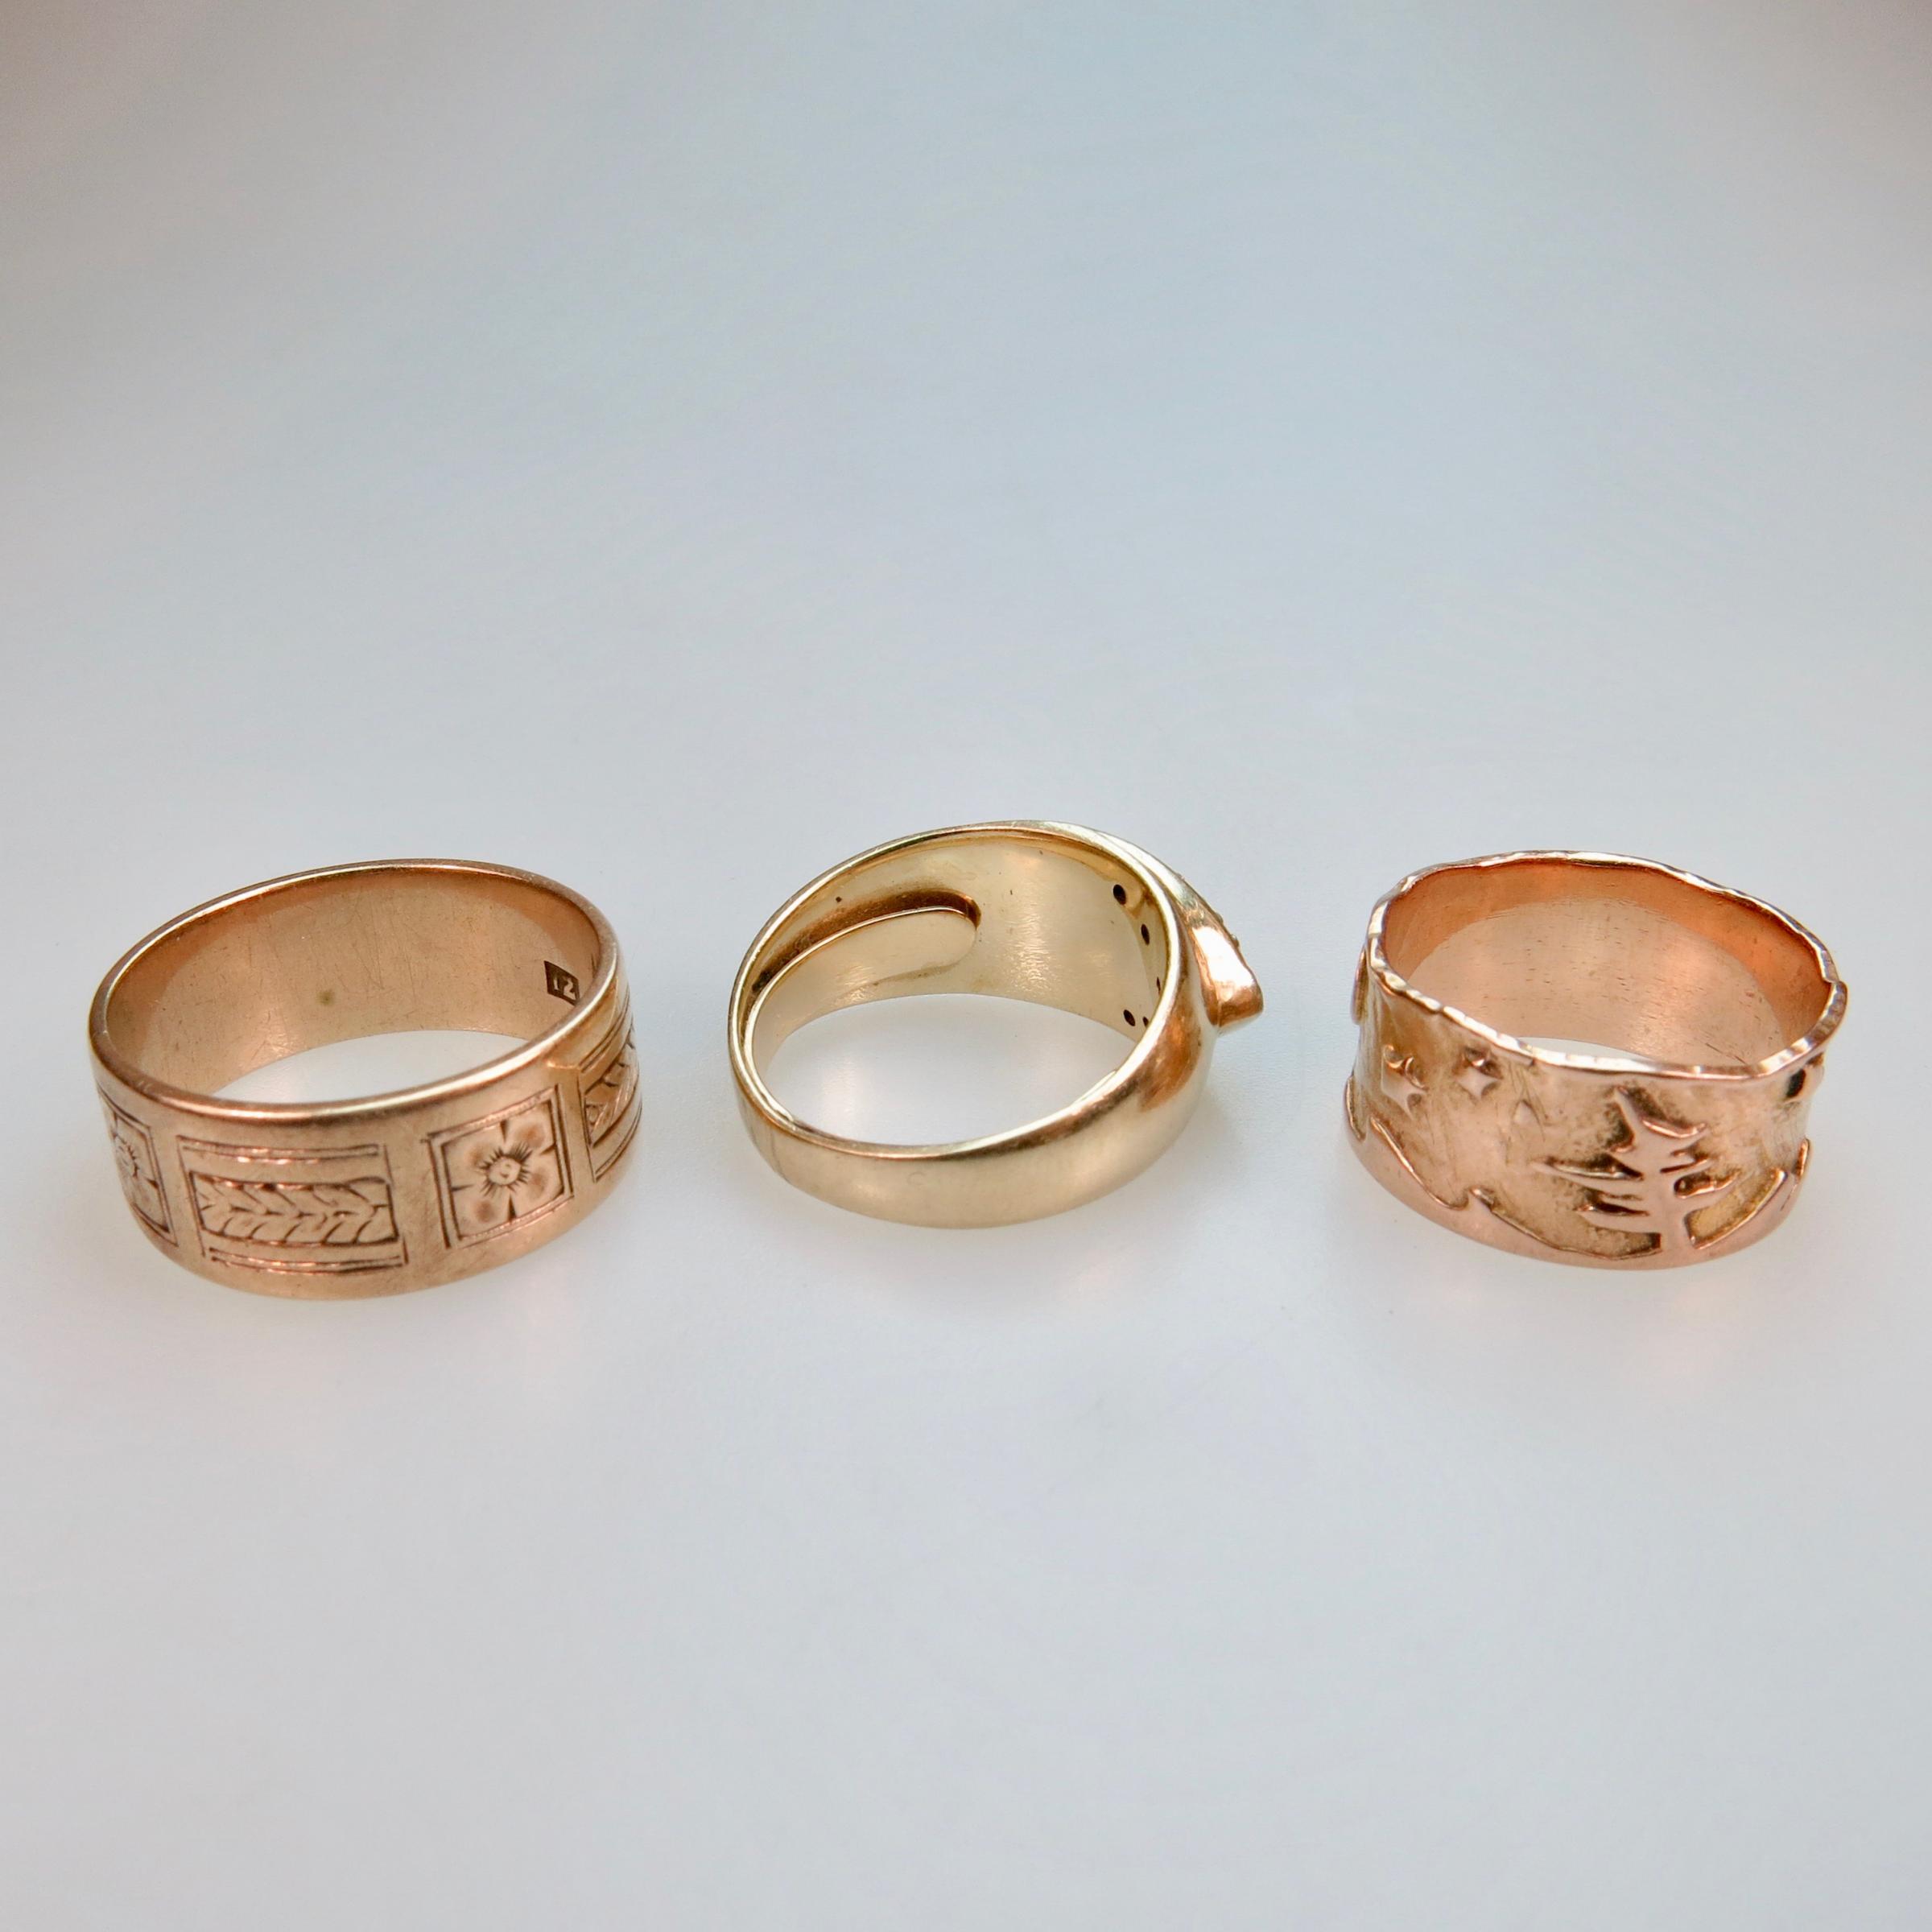 1 x 12k And 2 x 14k Gold Rings